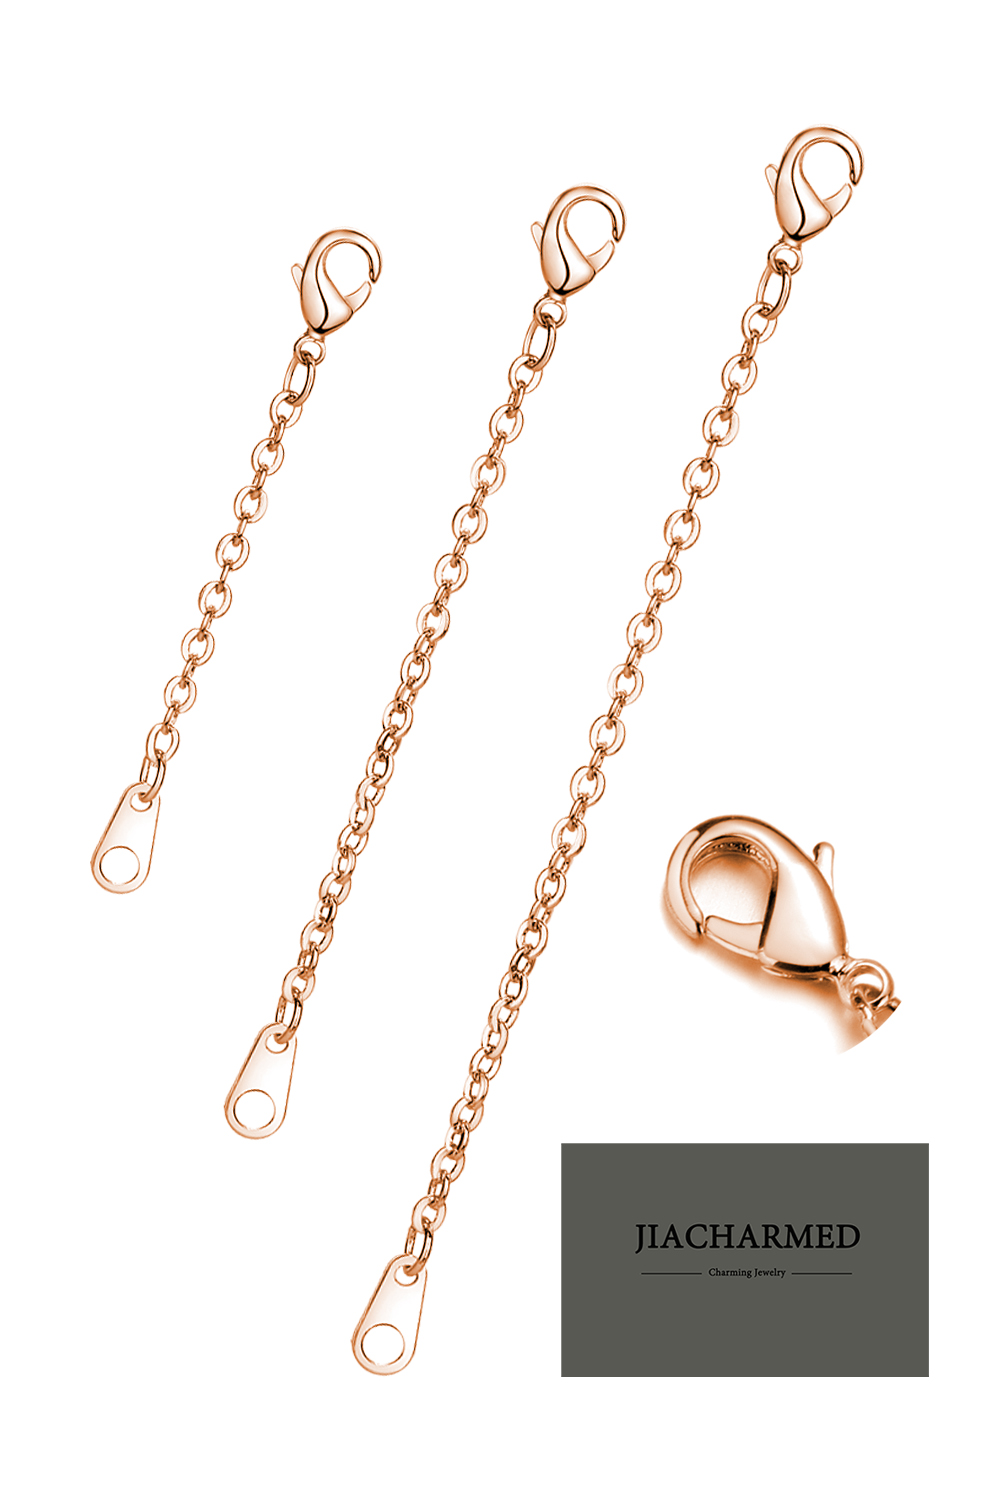 Rose Gold Necklace Extenders Delicate 1,2,3 Inches Necklace Extension  Chain Set for Necklaces Chokers Bracelets Anklets, 2mm Width Chain Extender